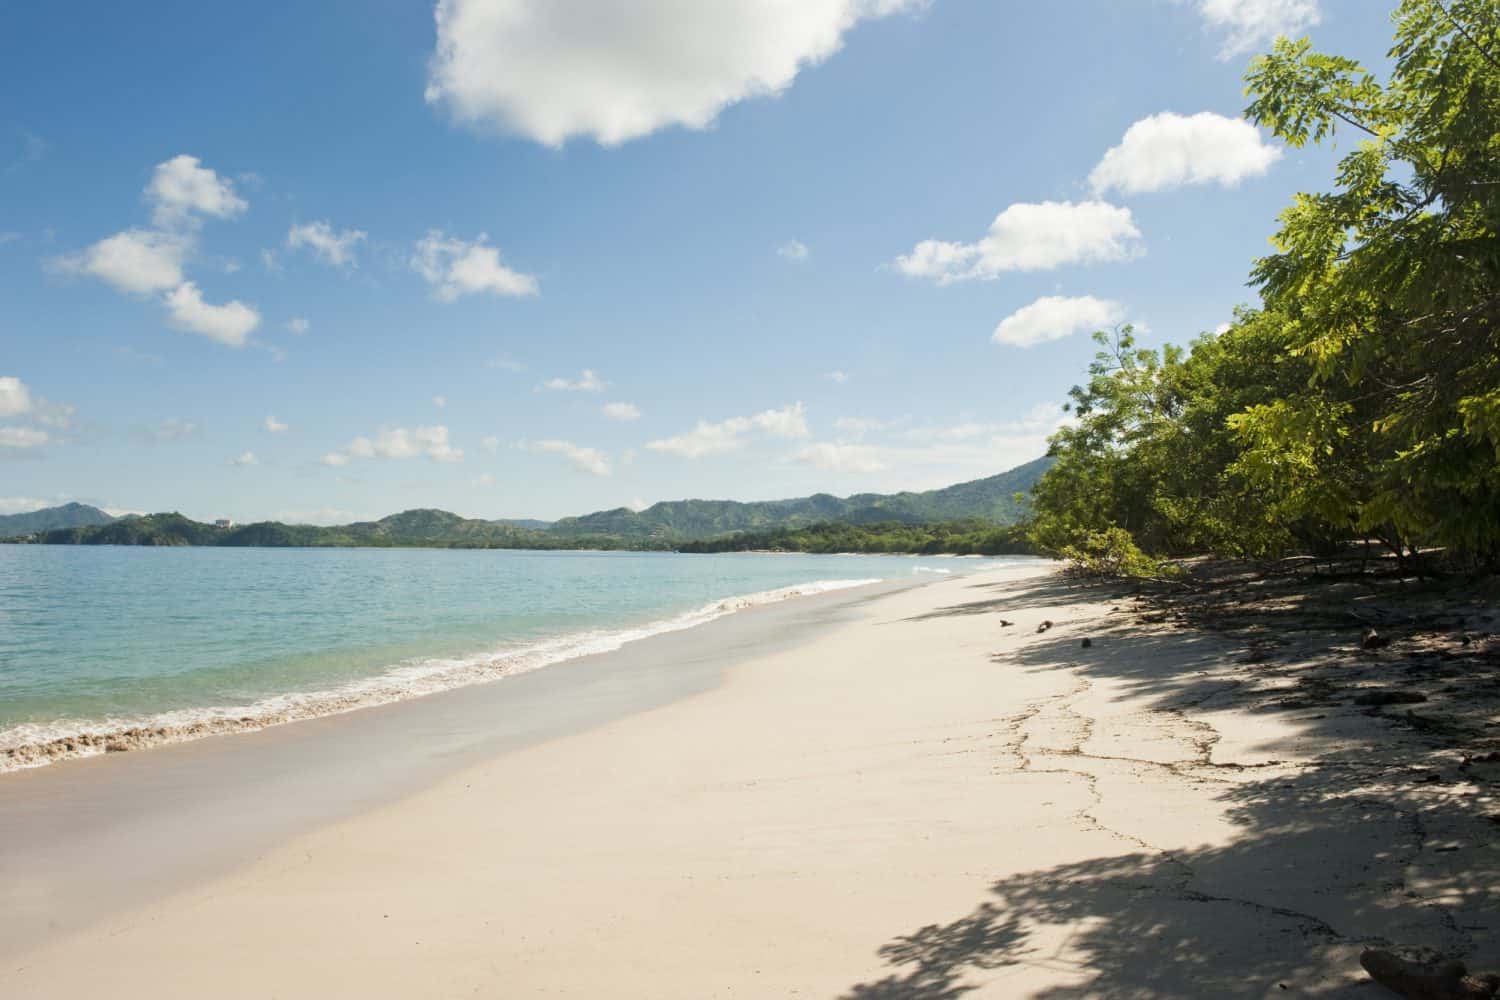 The 17 Best Beaches in Costa Rica for Families